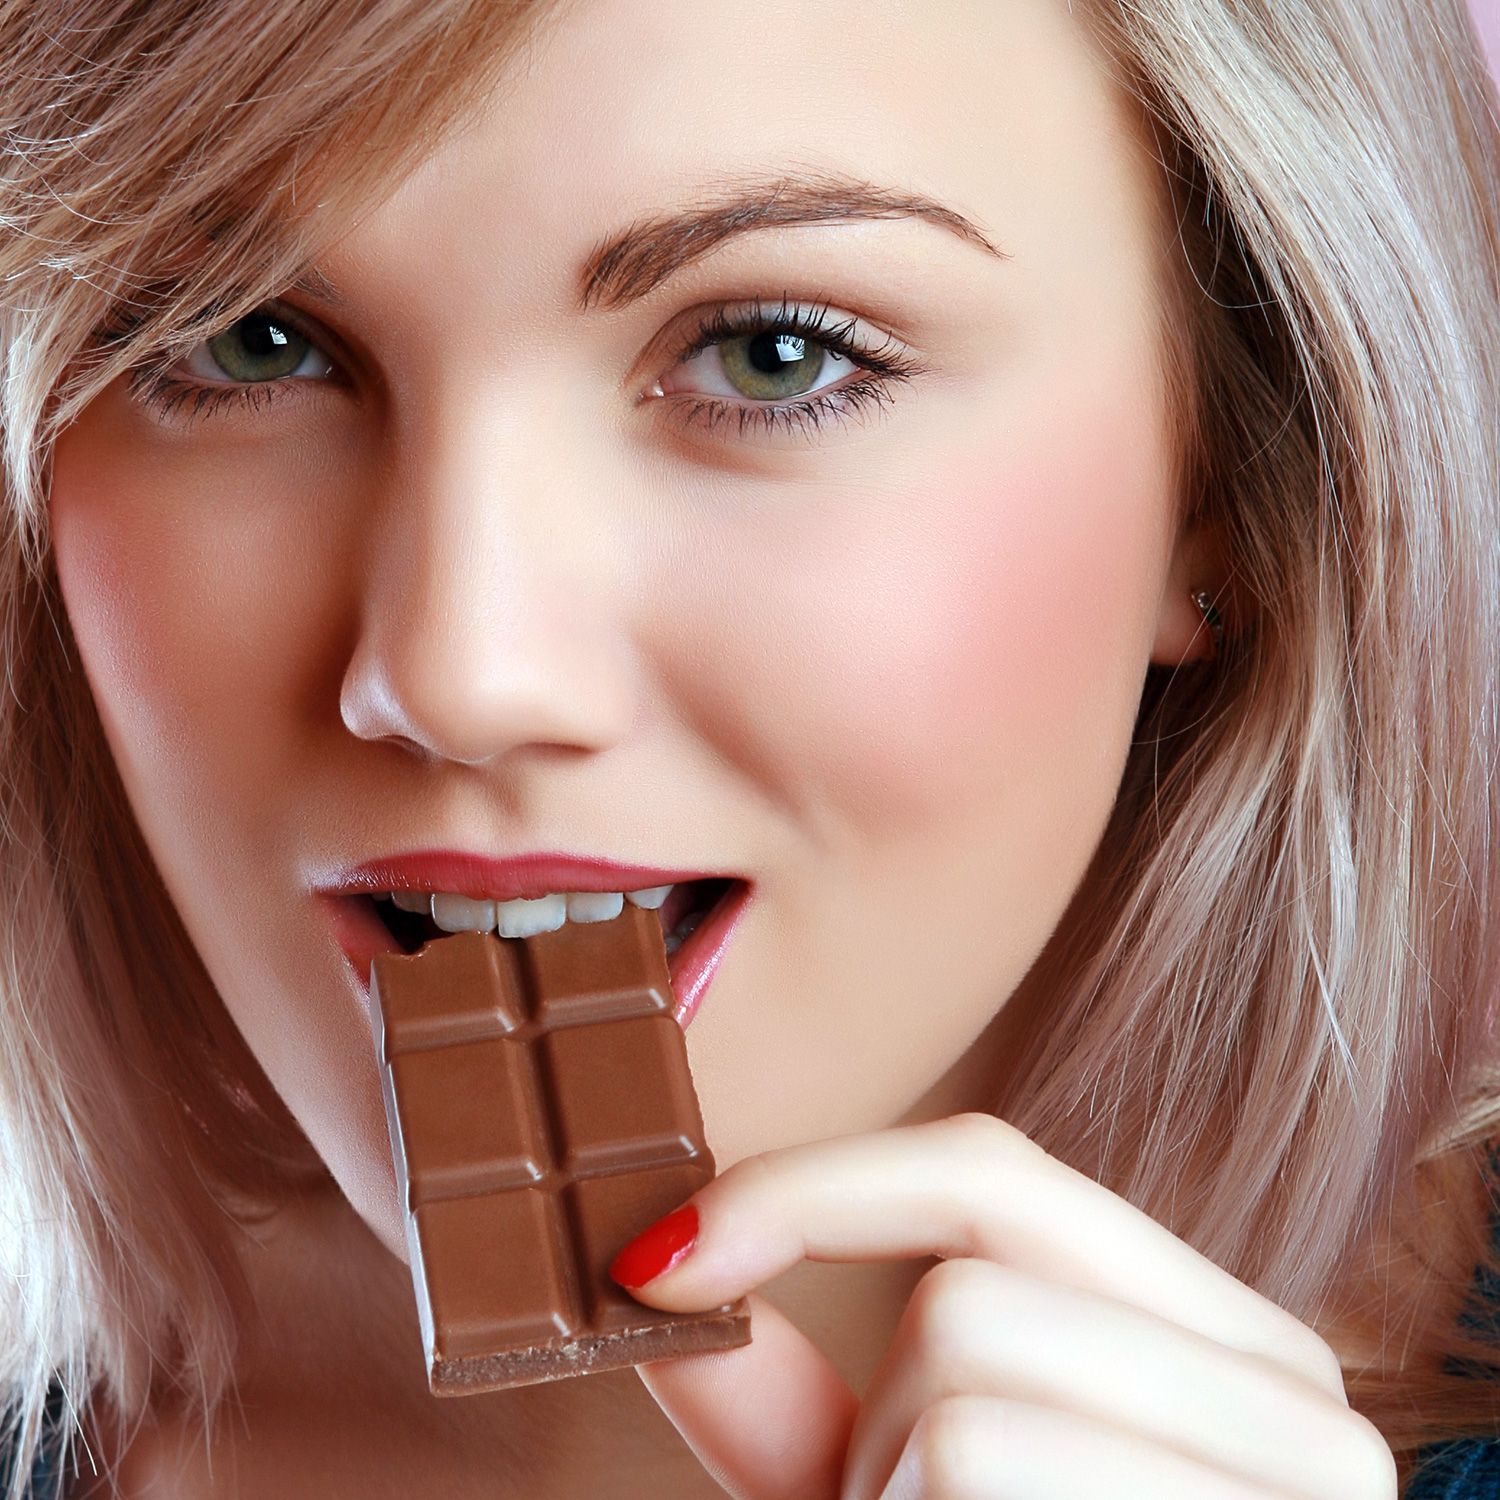 Dark chocolate has been shown to be beneficial to human health, but milk chocolate, white chocolate, and other varieties are not.